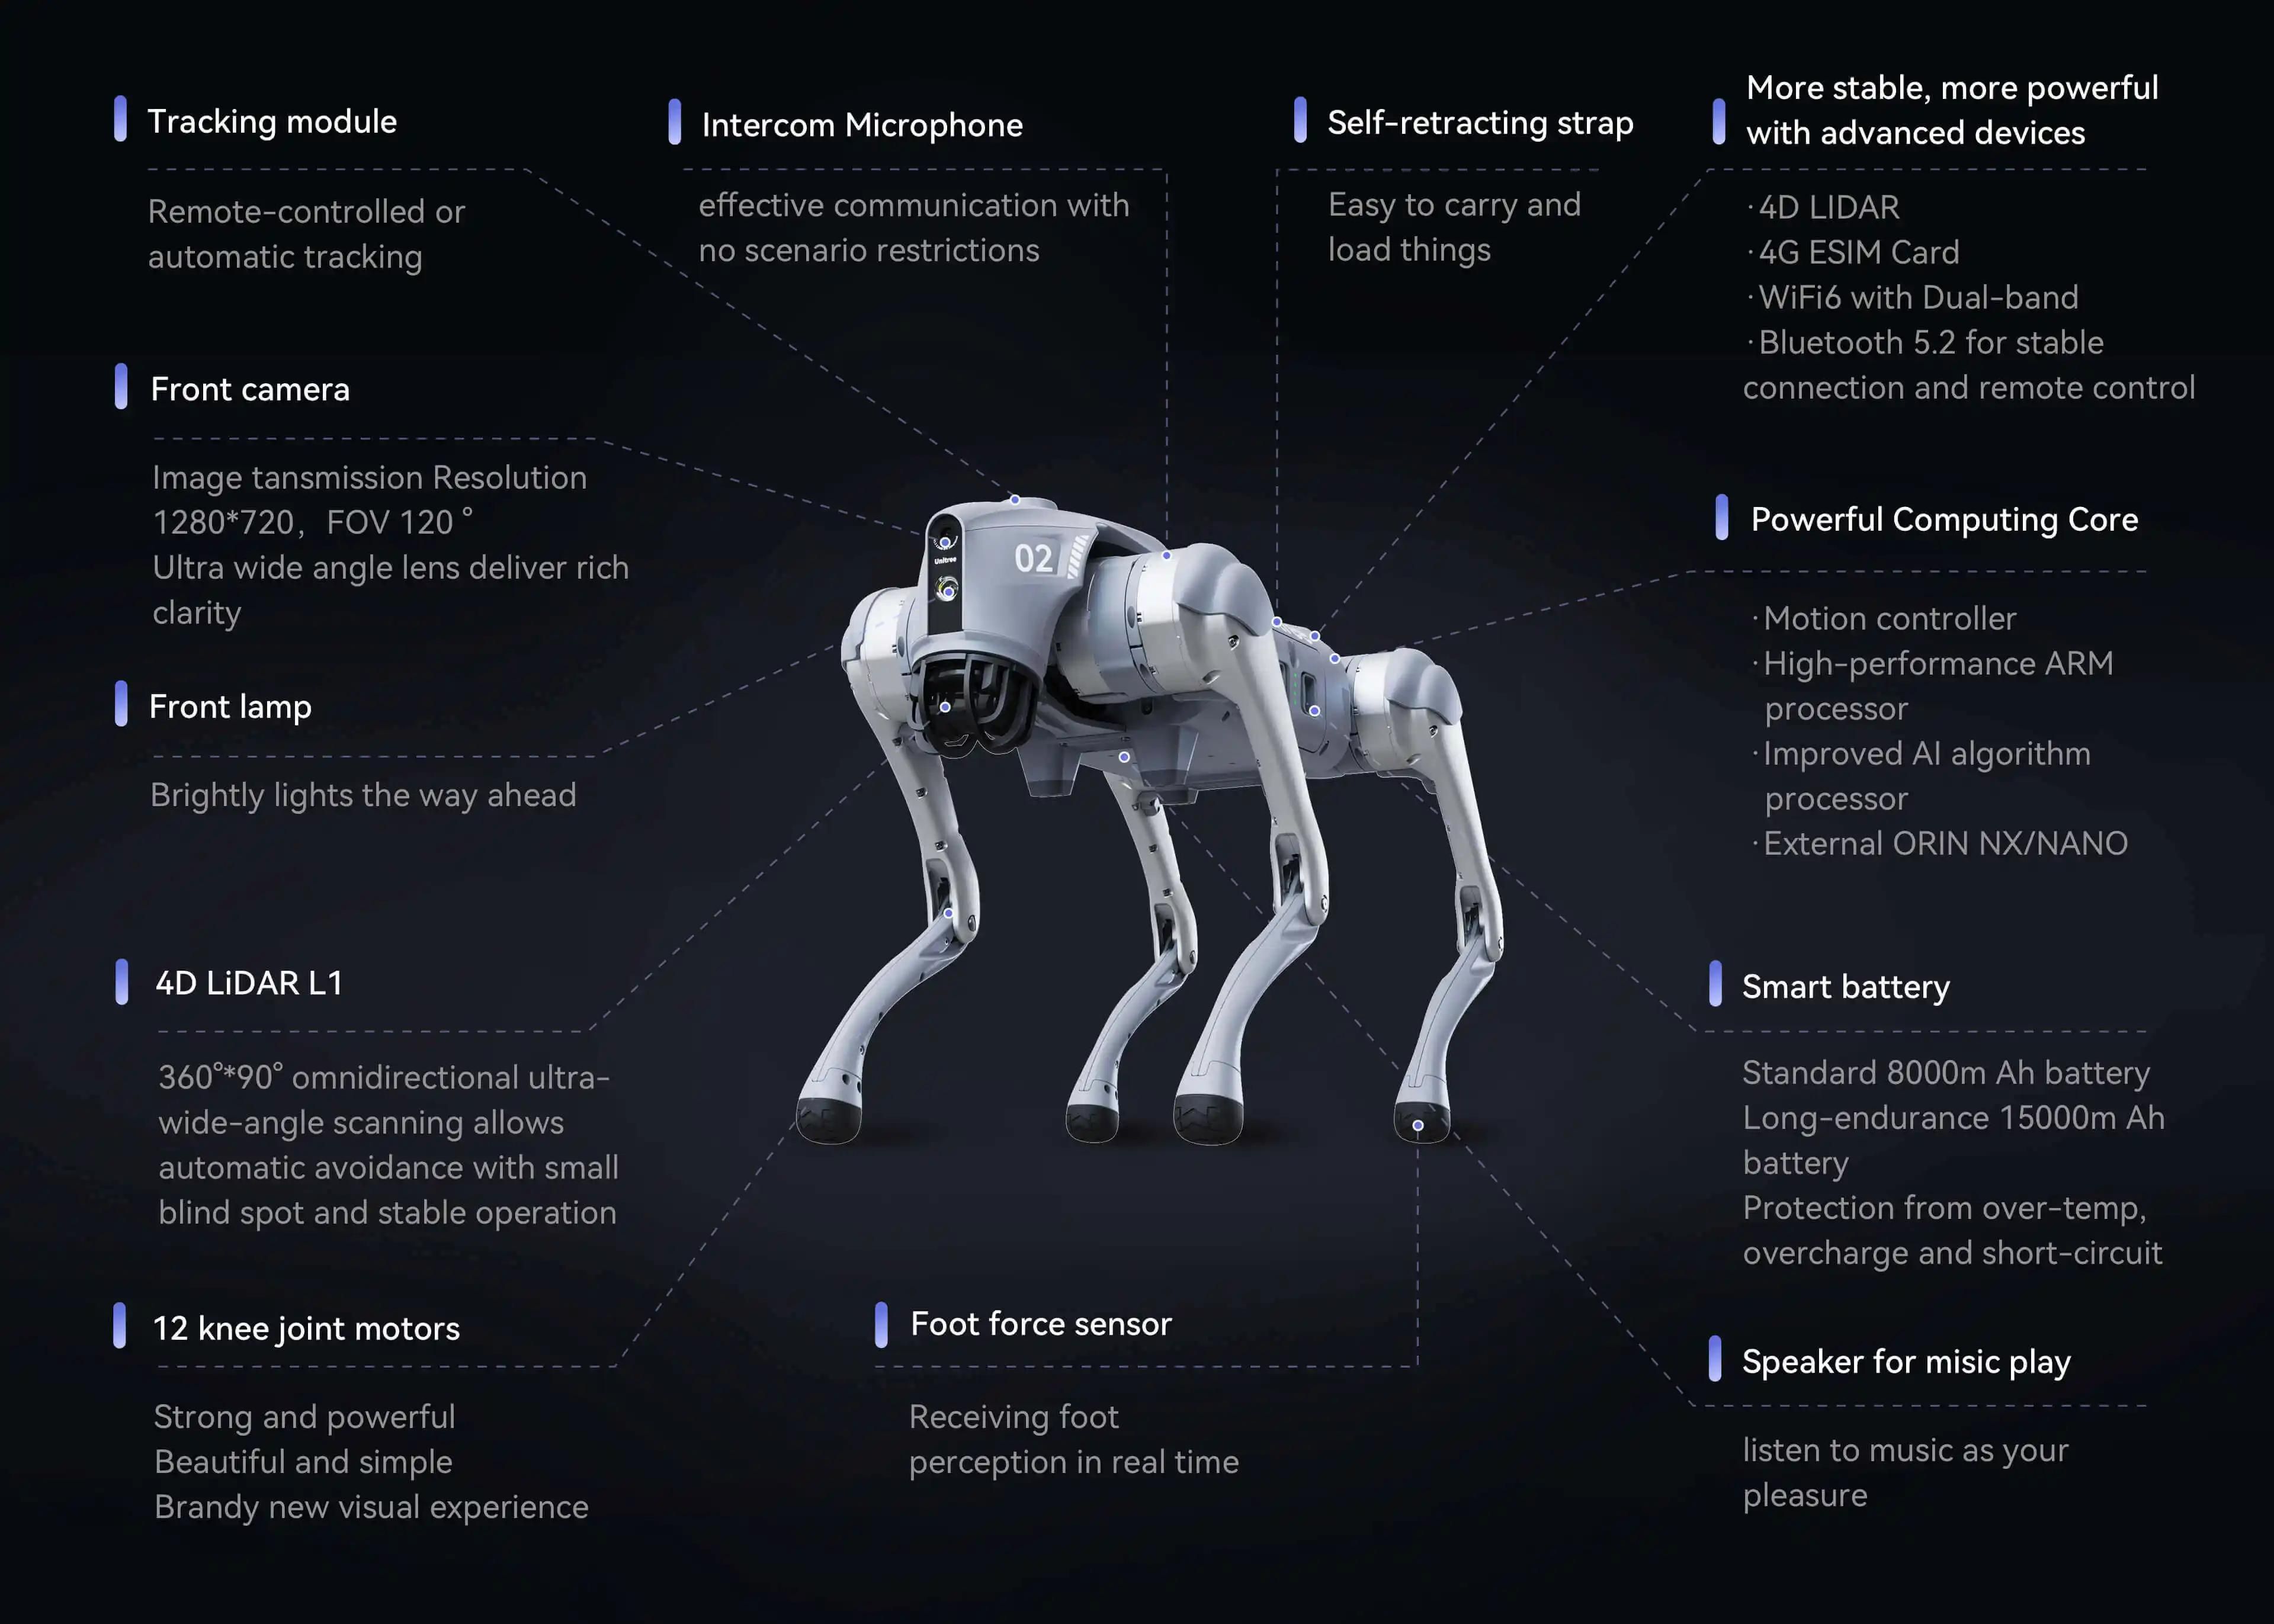 Key Features of Robot Go2